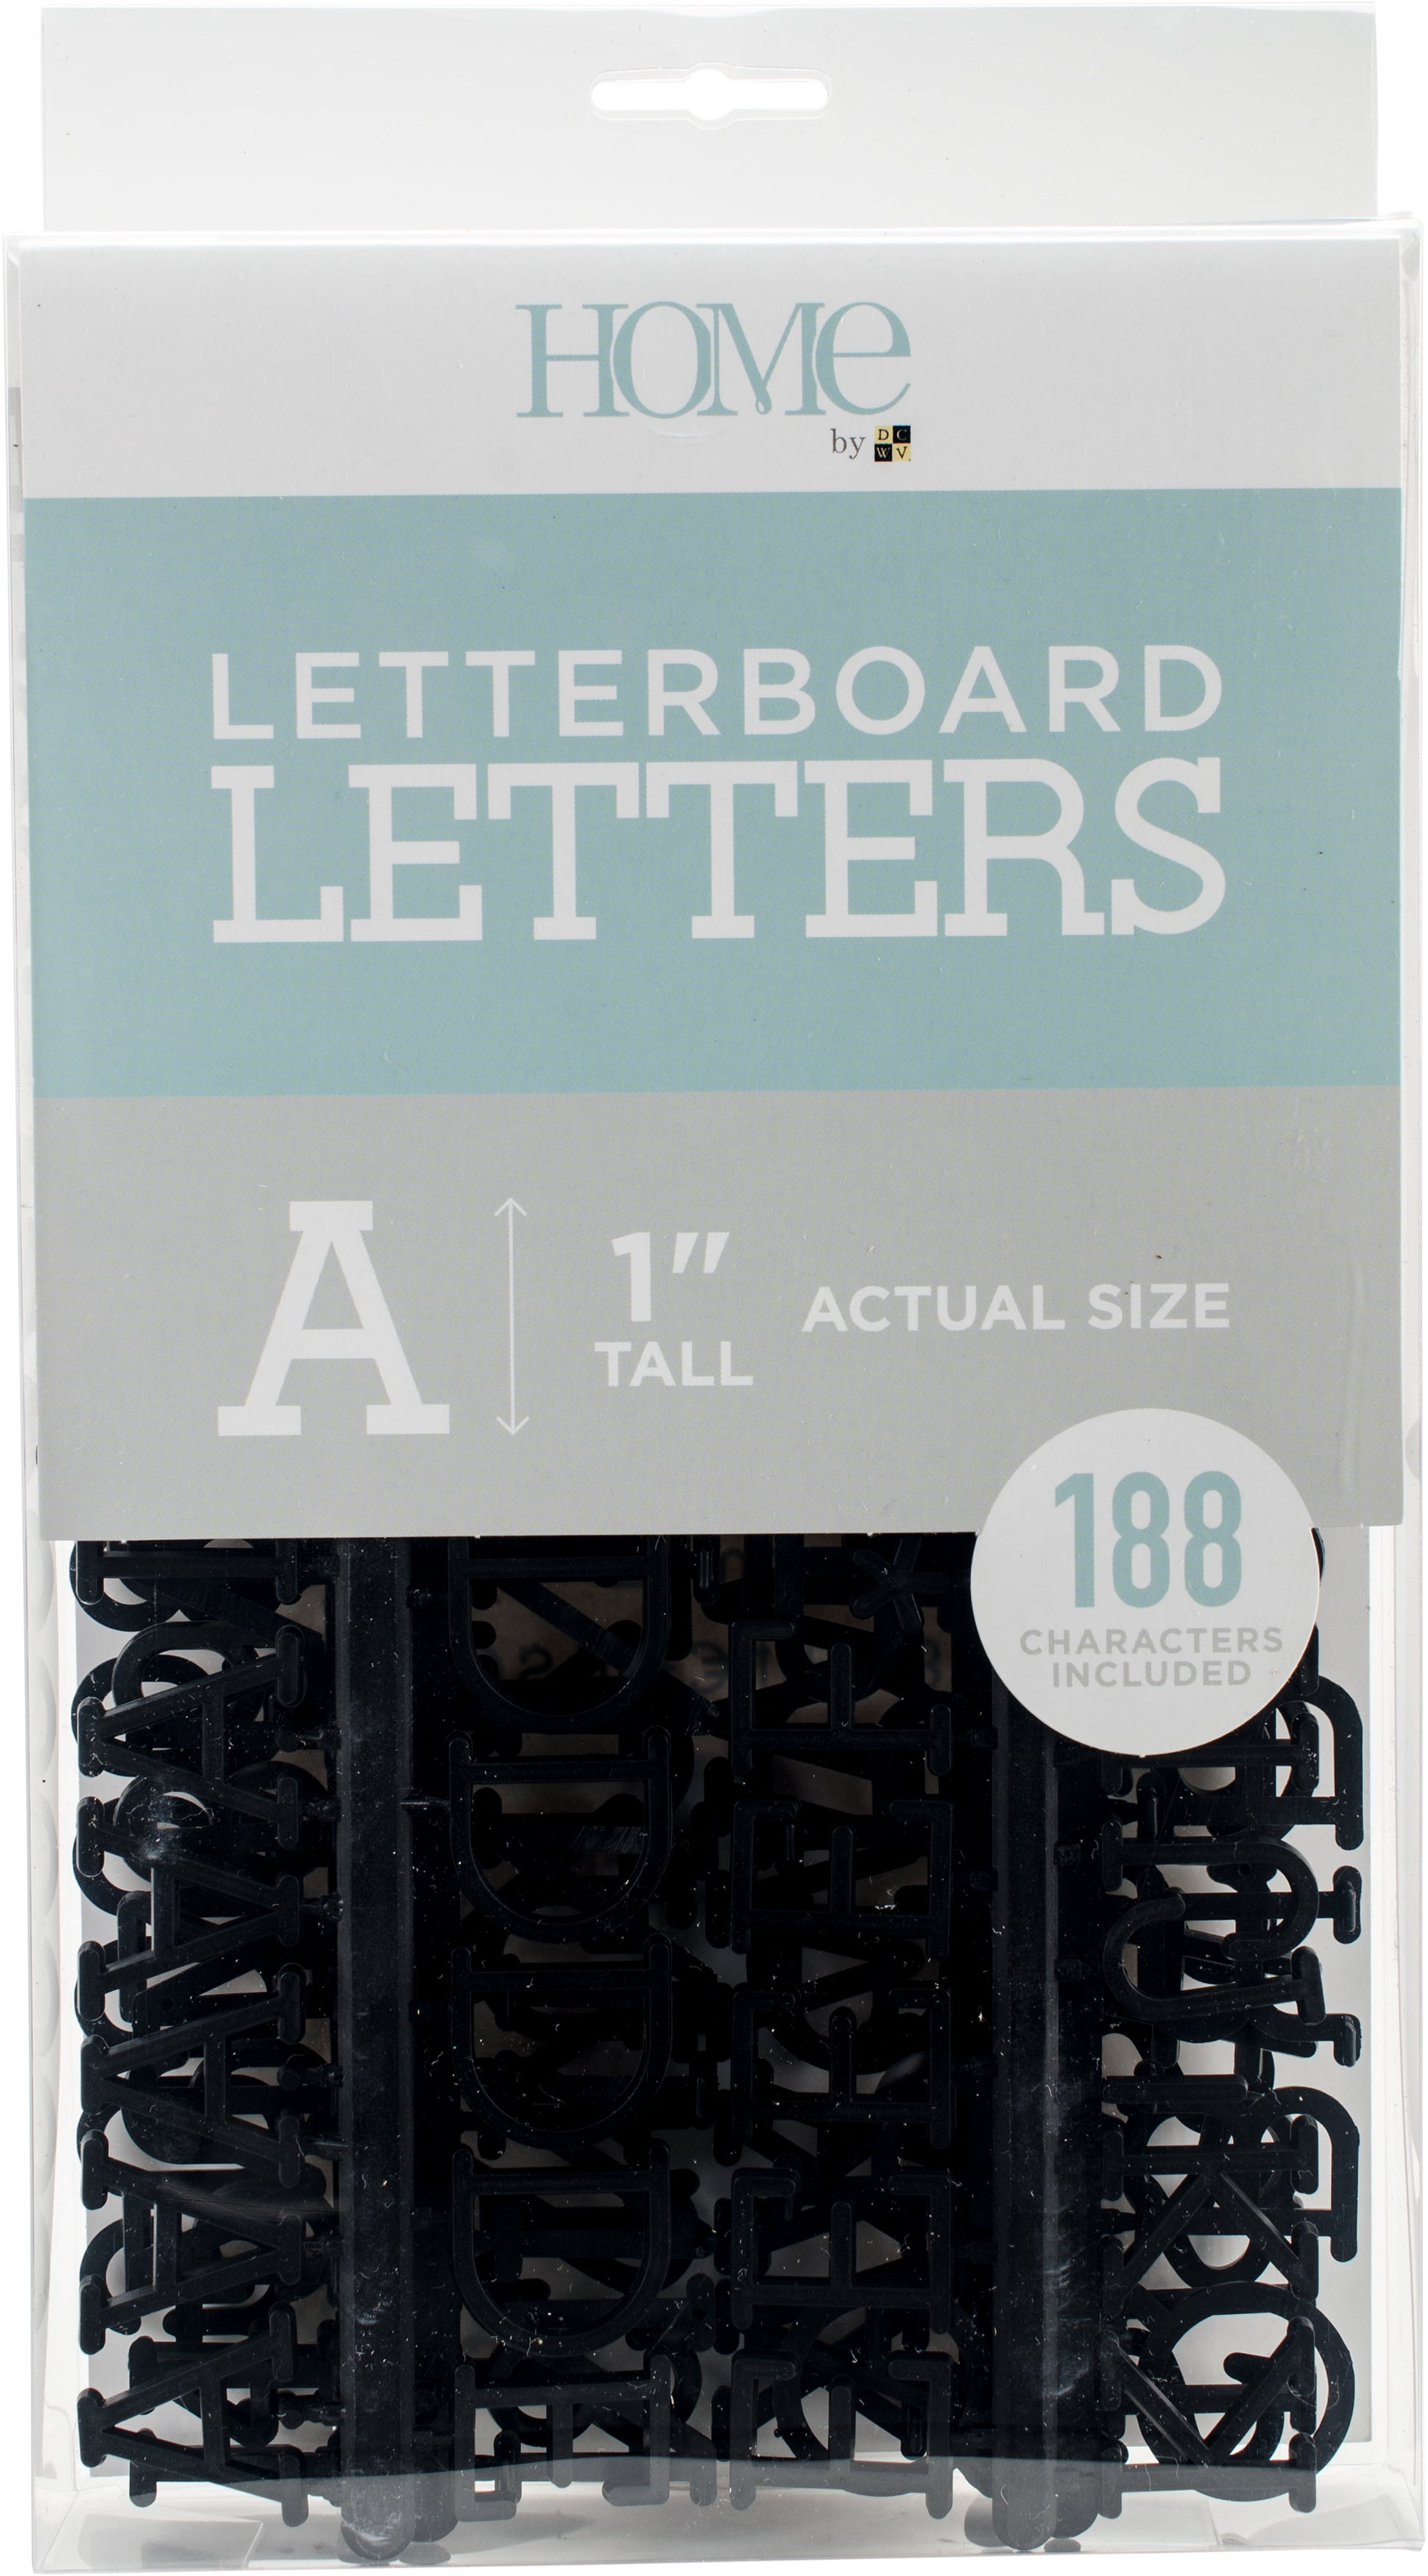 Veskaoty 1 Inch Letters for Flet Letter Board,188 Pieces Including Letters Black Numbers & Symbols for Changeable Plstic Letter Board 